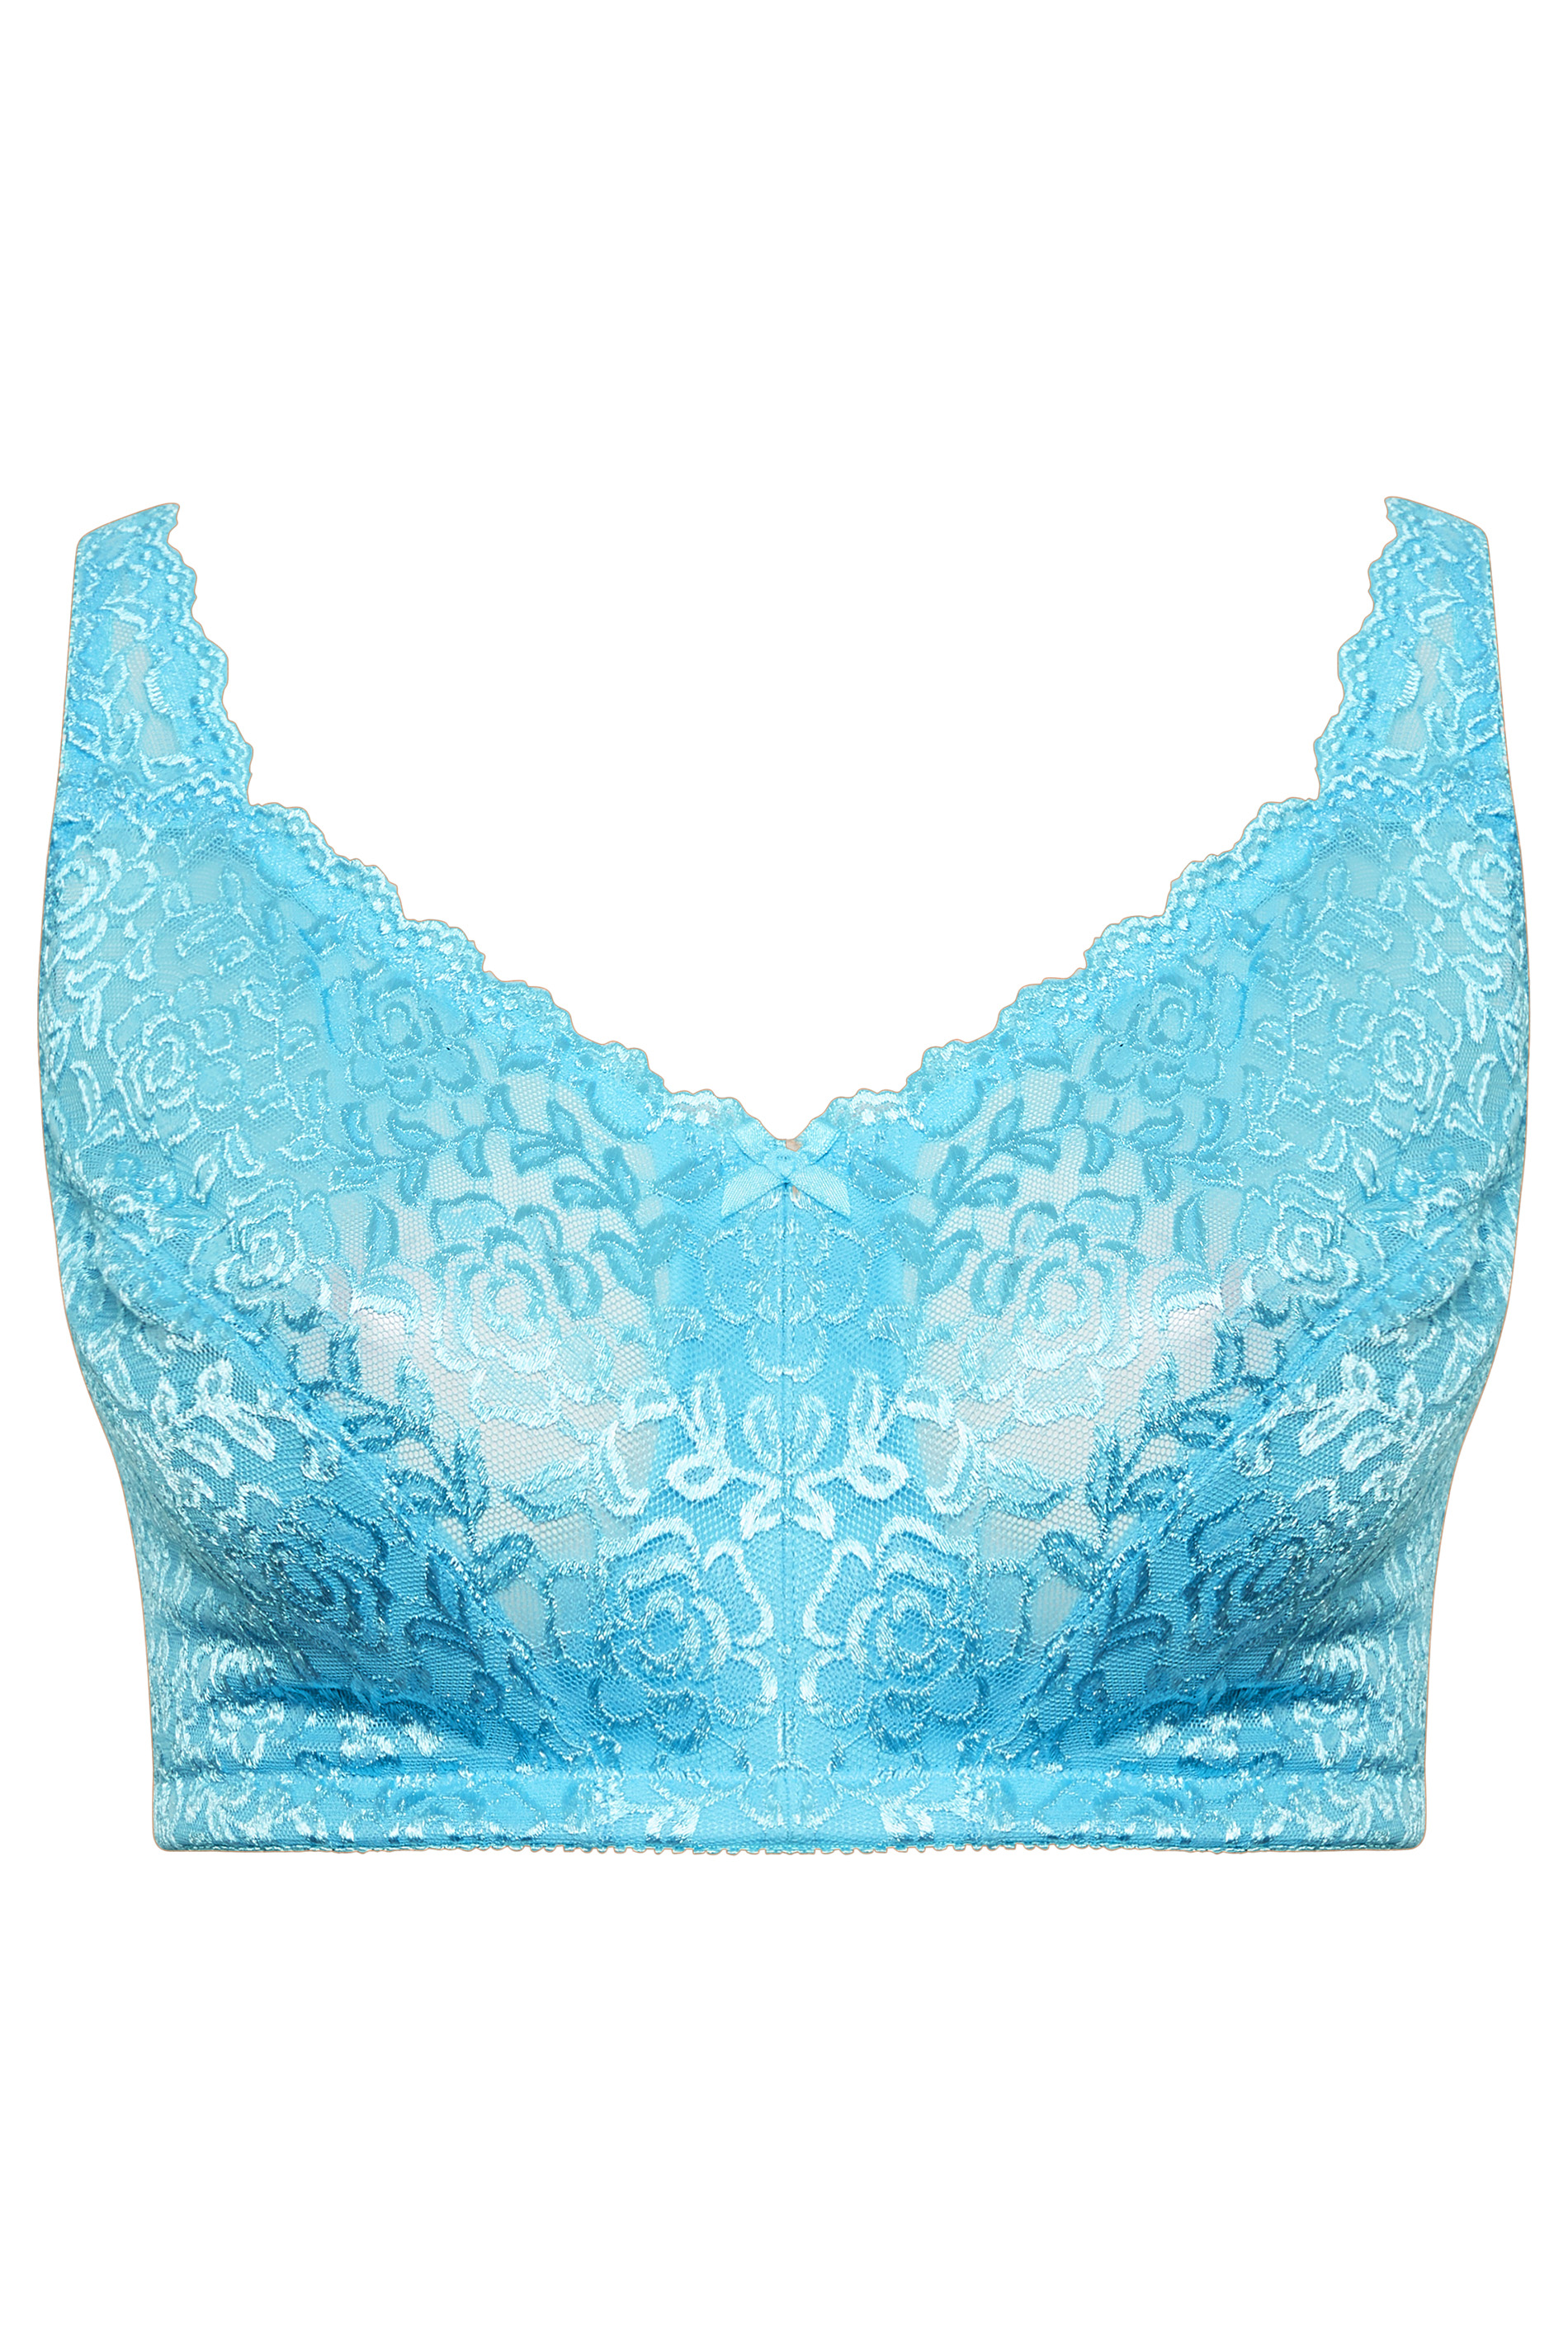 YOURS Plus Size Light Blue Hi Shine Lace Non-Padded Non-Wired Full Cup Bra 3